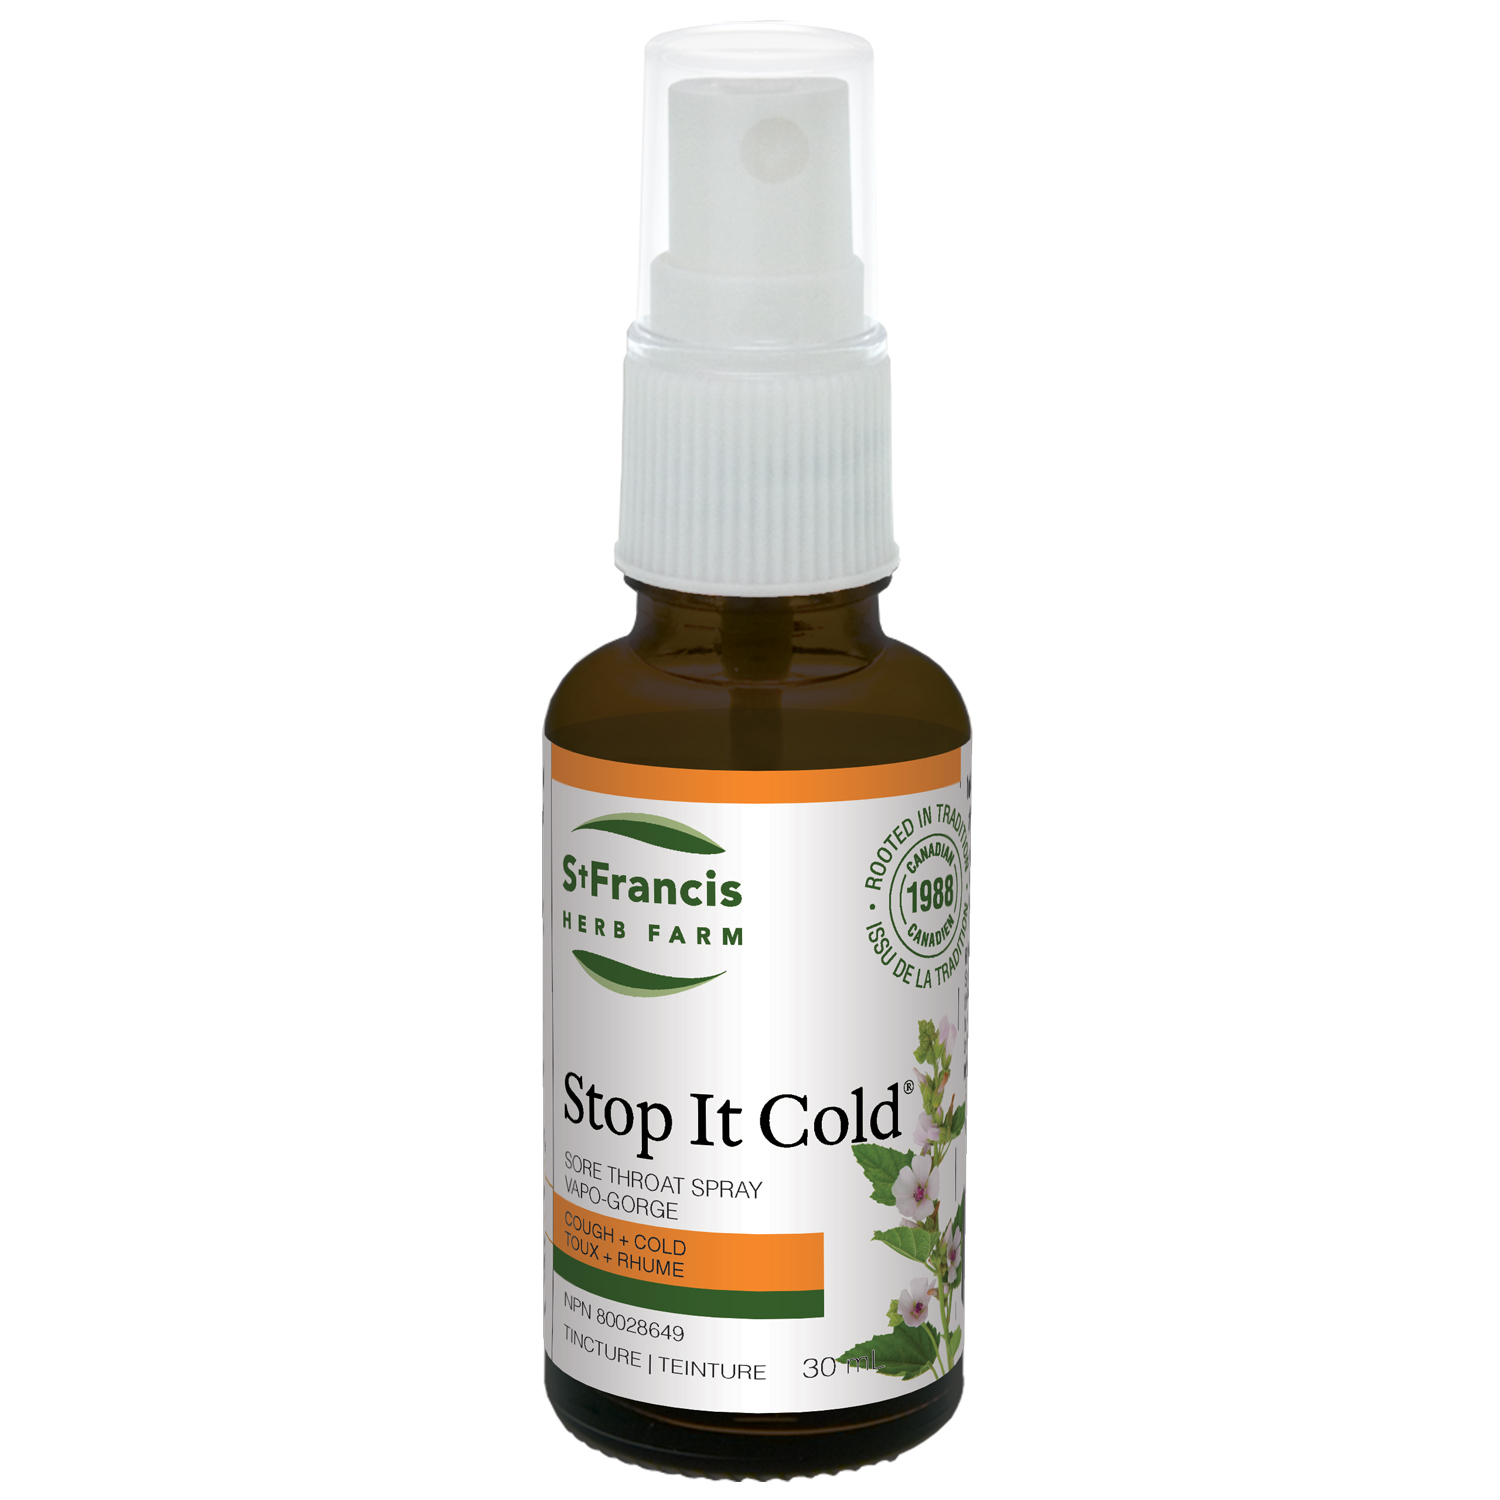 Stop It Cold® (Throat Spray) - By St. Francis Herb Farm